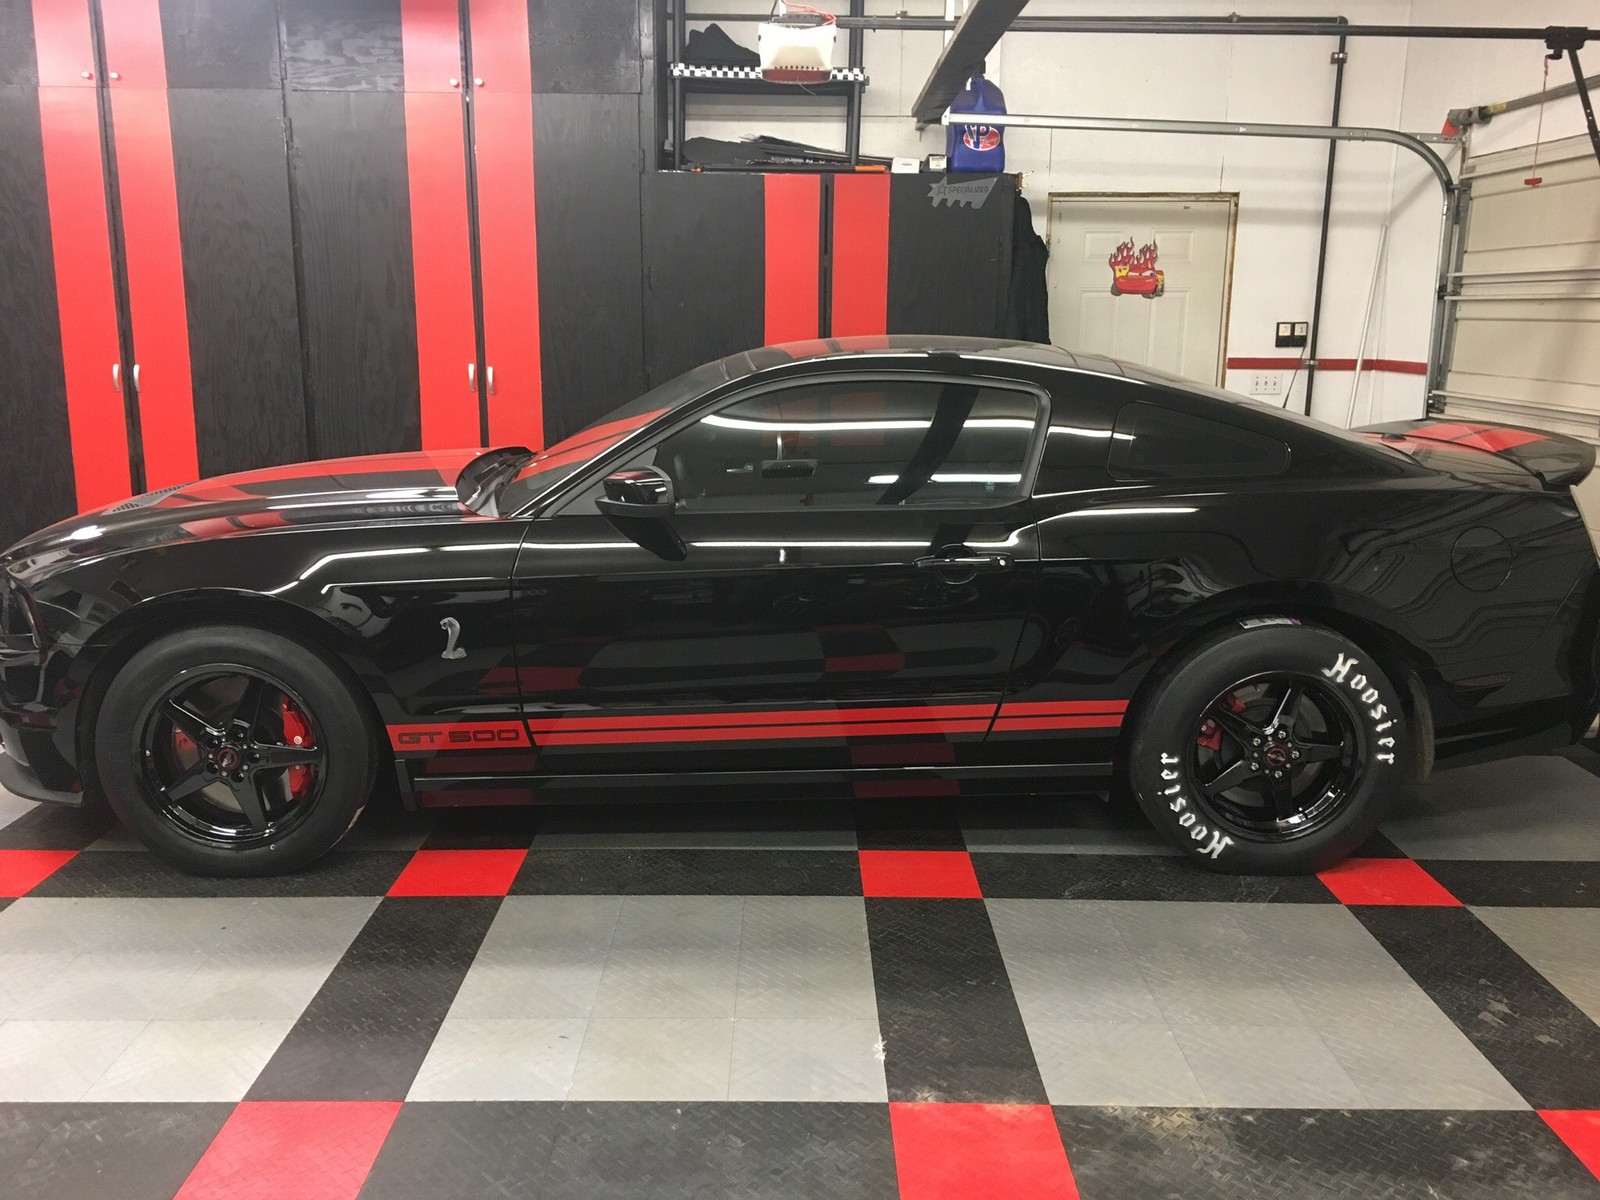 2013 Ford Mustang Shelby Gt500 14 Mile Drag Racing Timeslip Specs 0 60